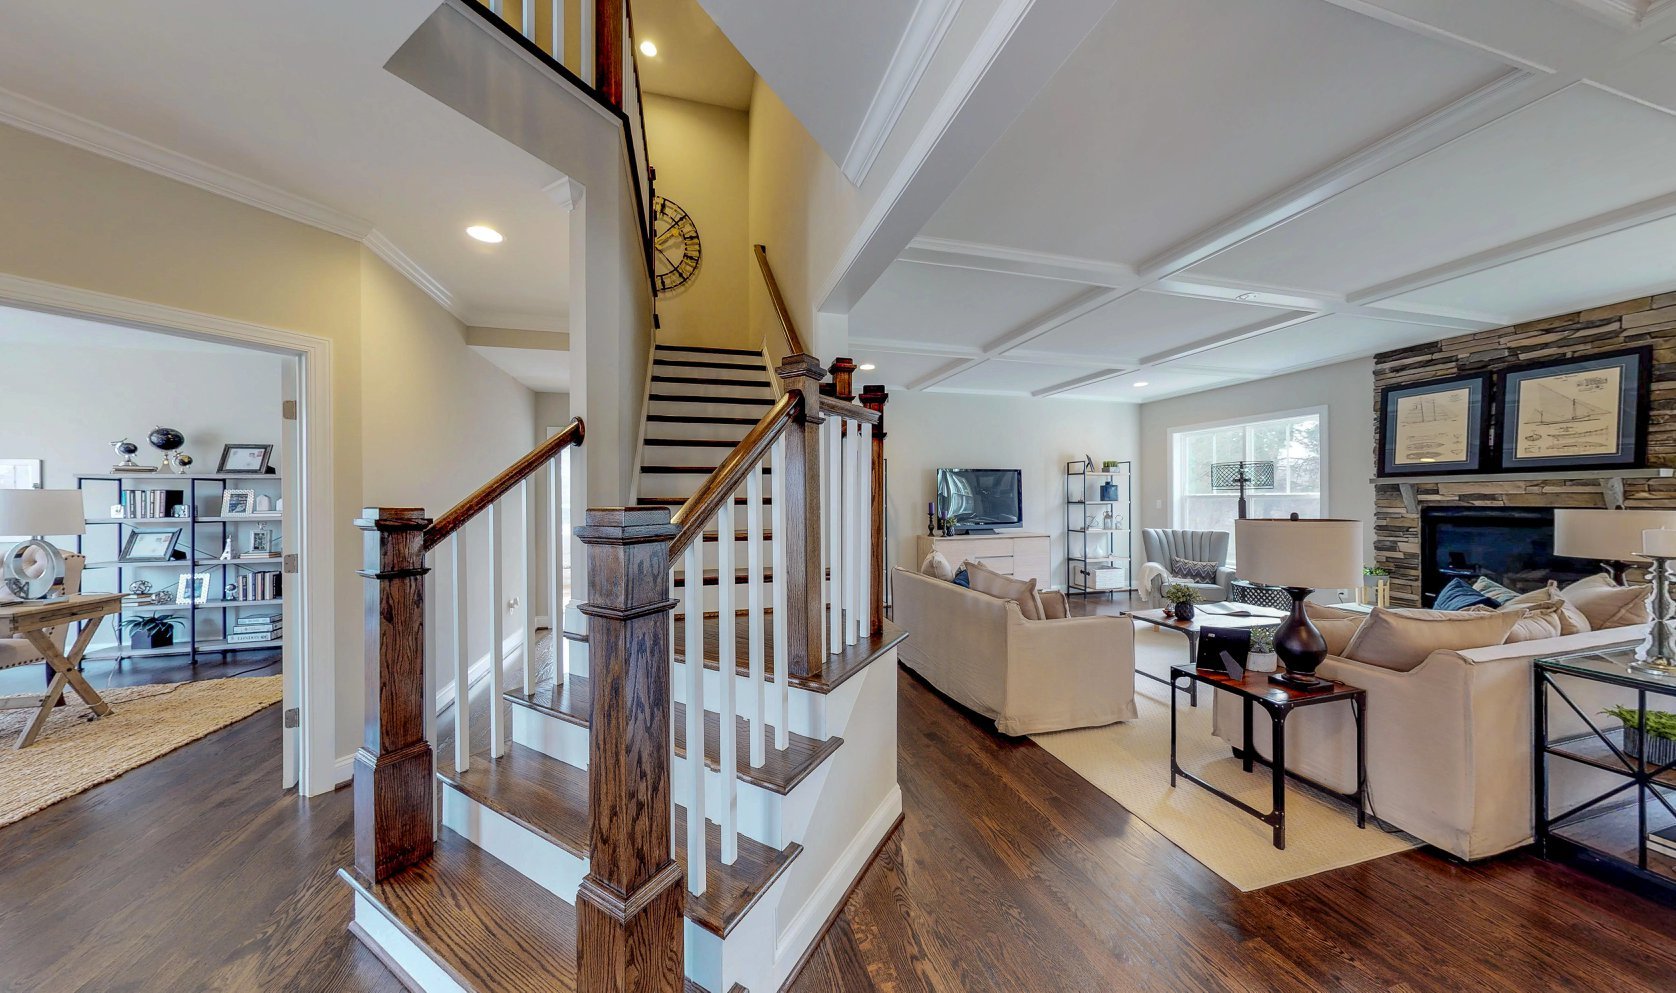 This showcases a completed loudoun stairs project within a home in northern virginia. 